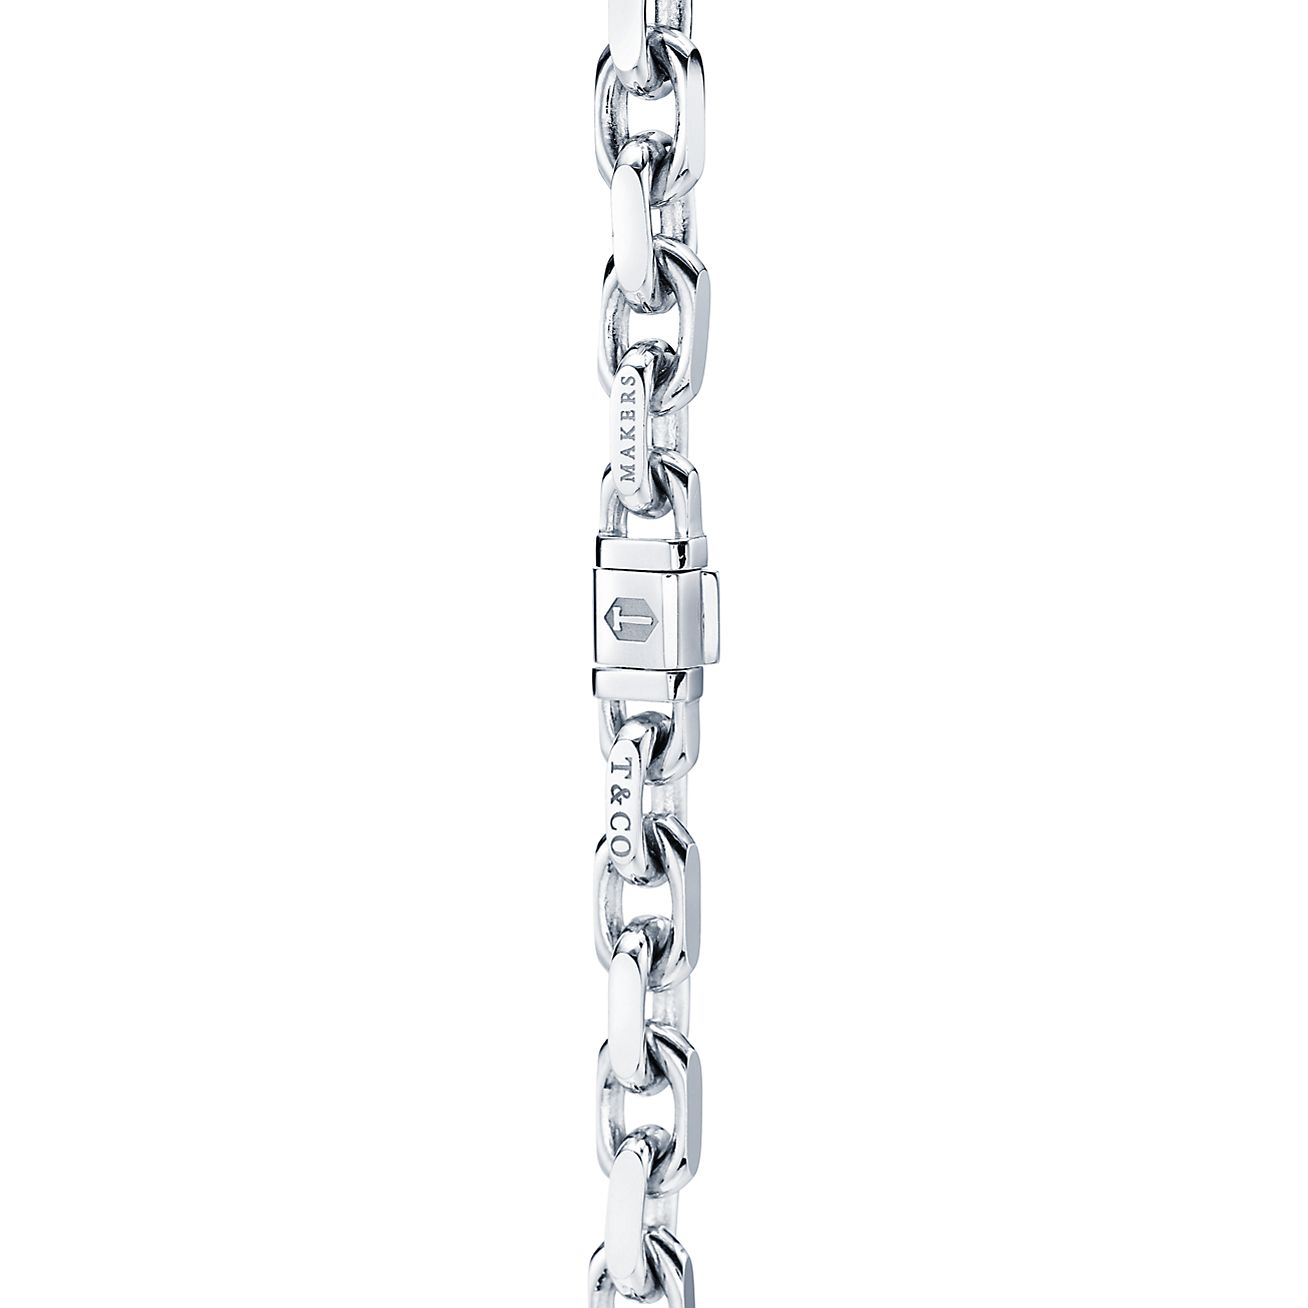 Tiffany 1837® Makers chain necklace in 18k gold, 24.